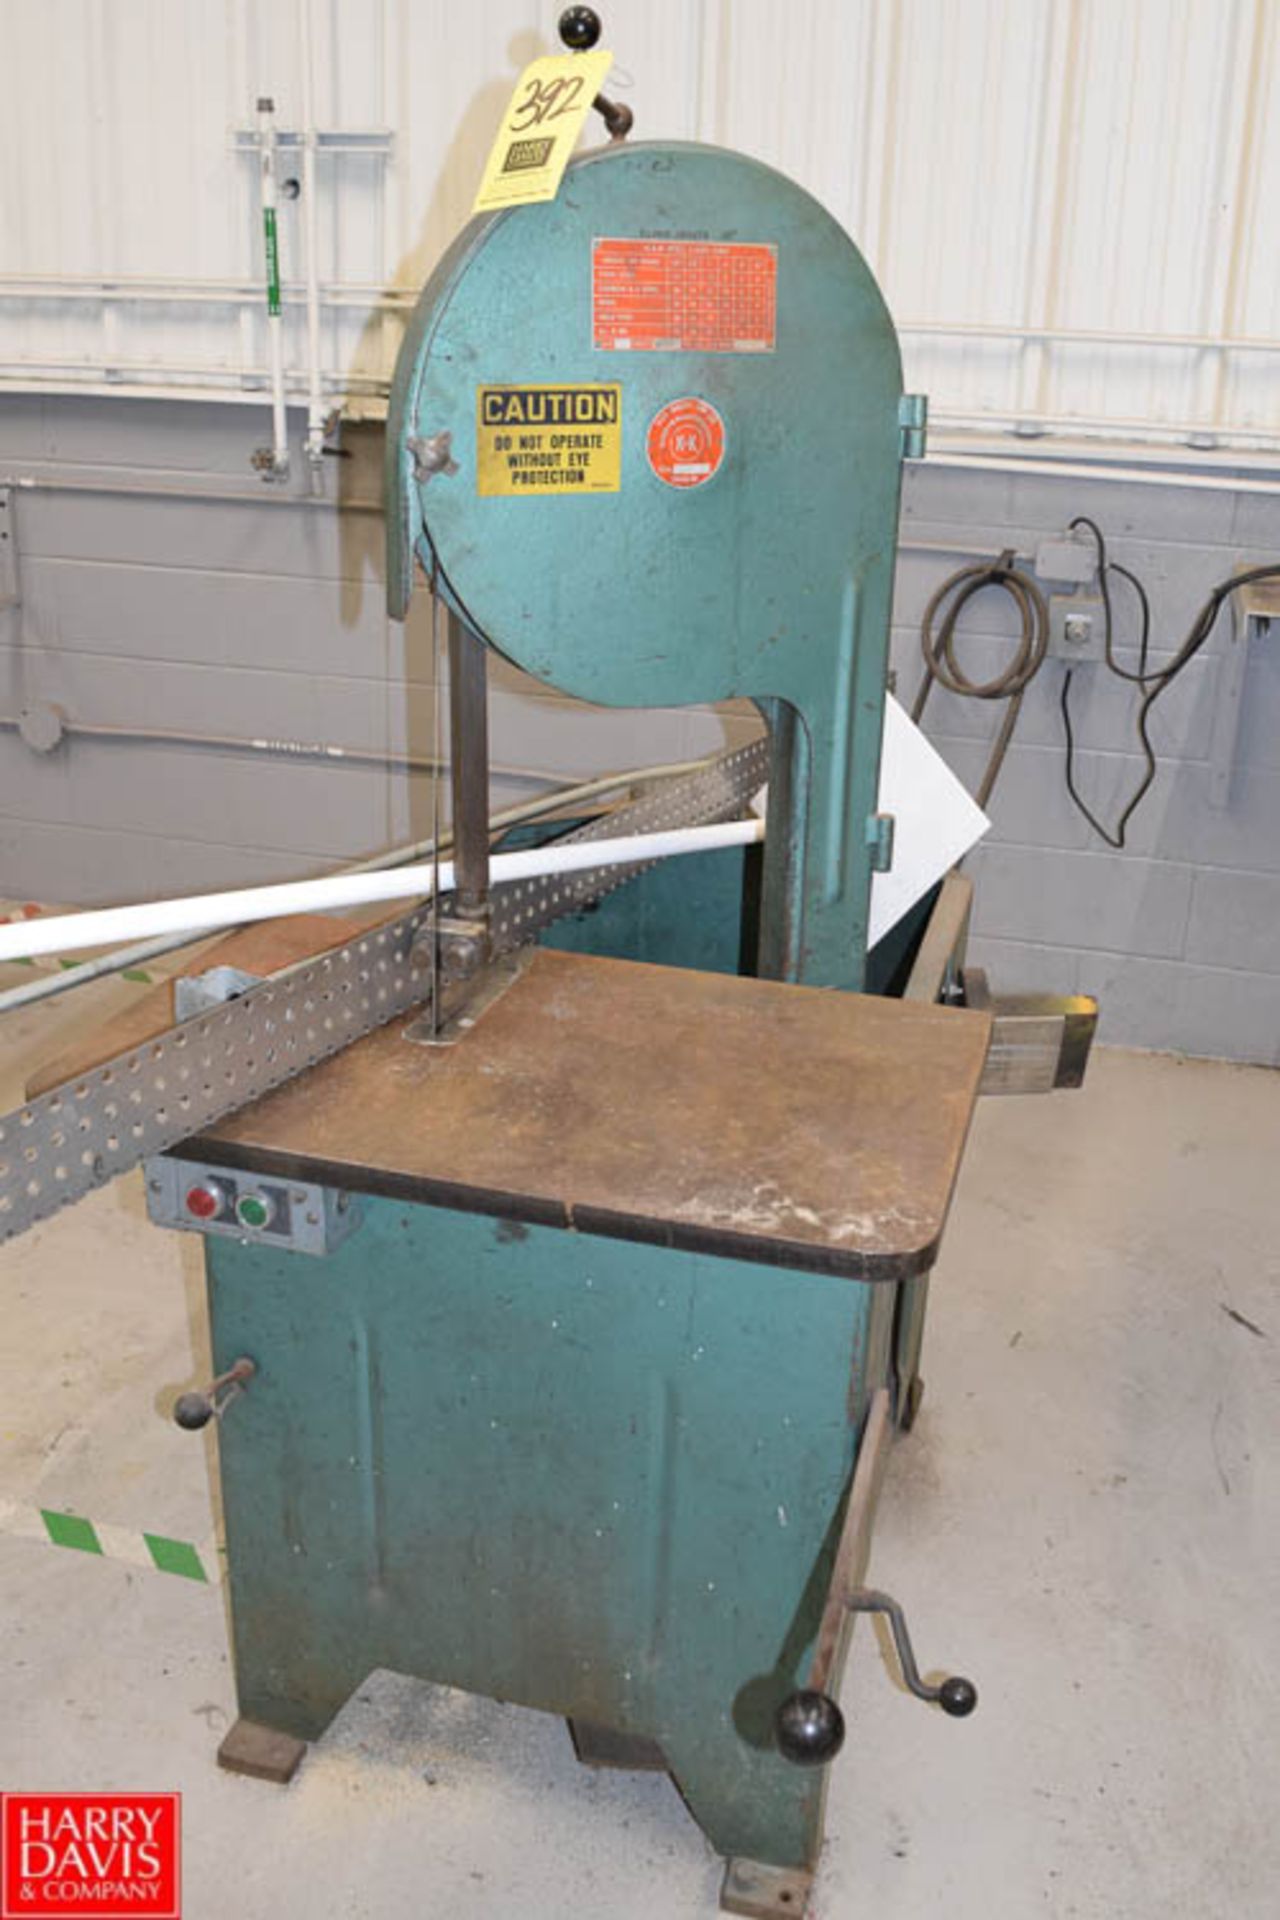 K and K Roll-a-Way Vertical Band Saw - Rigging Fee $ 65